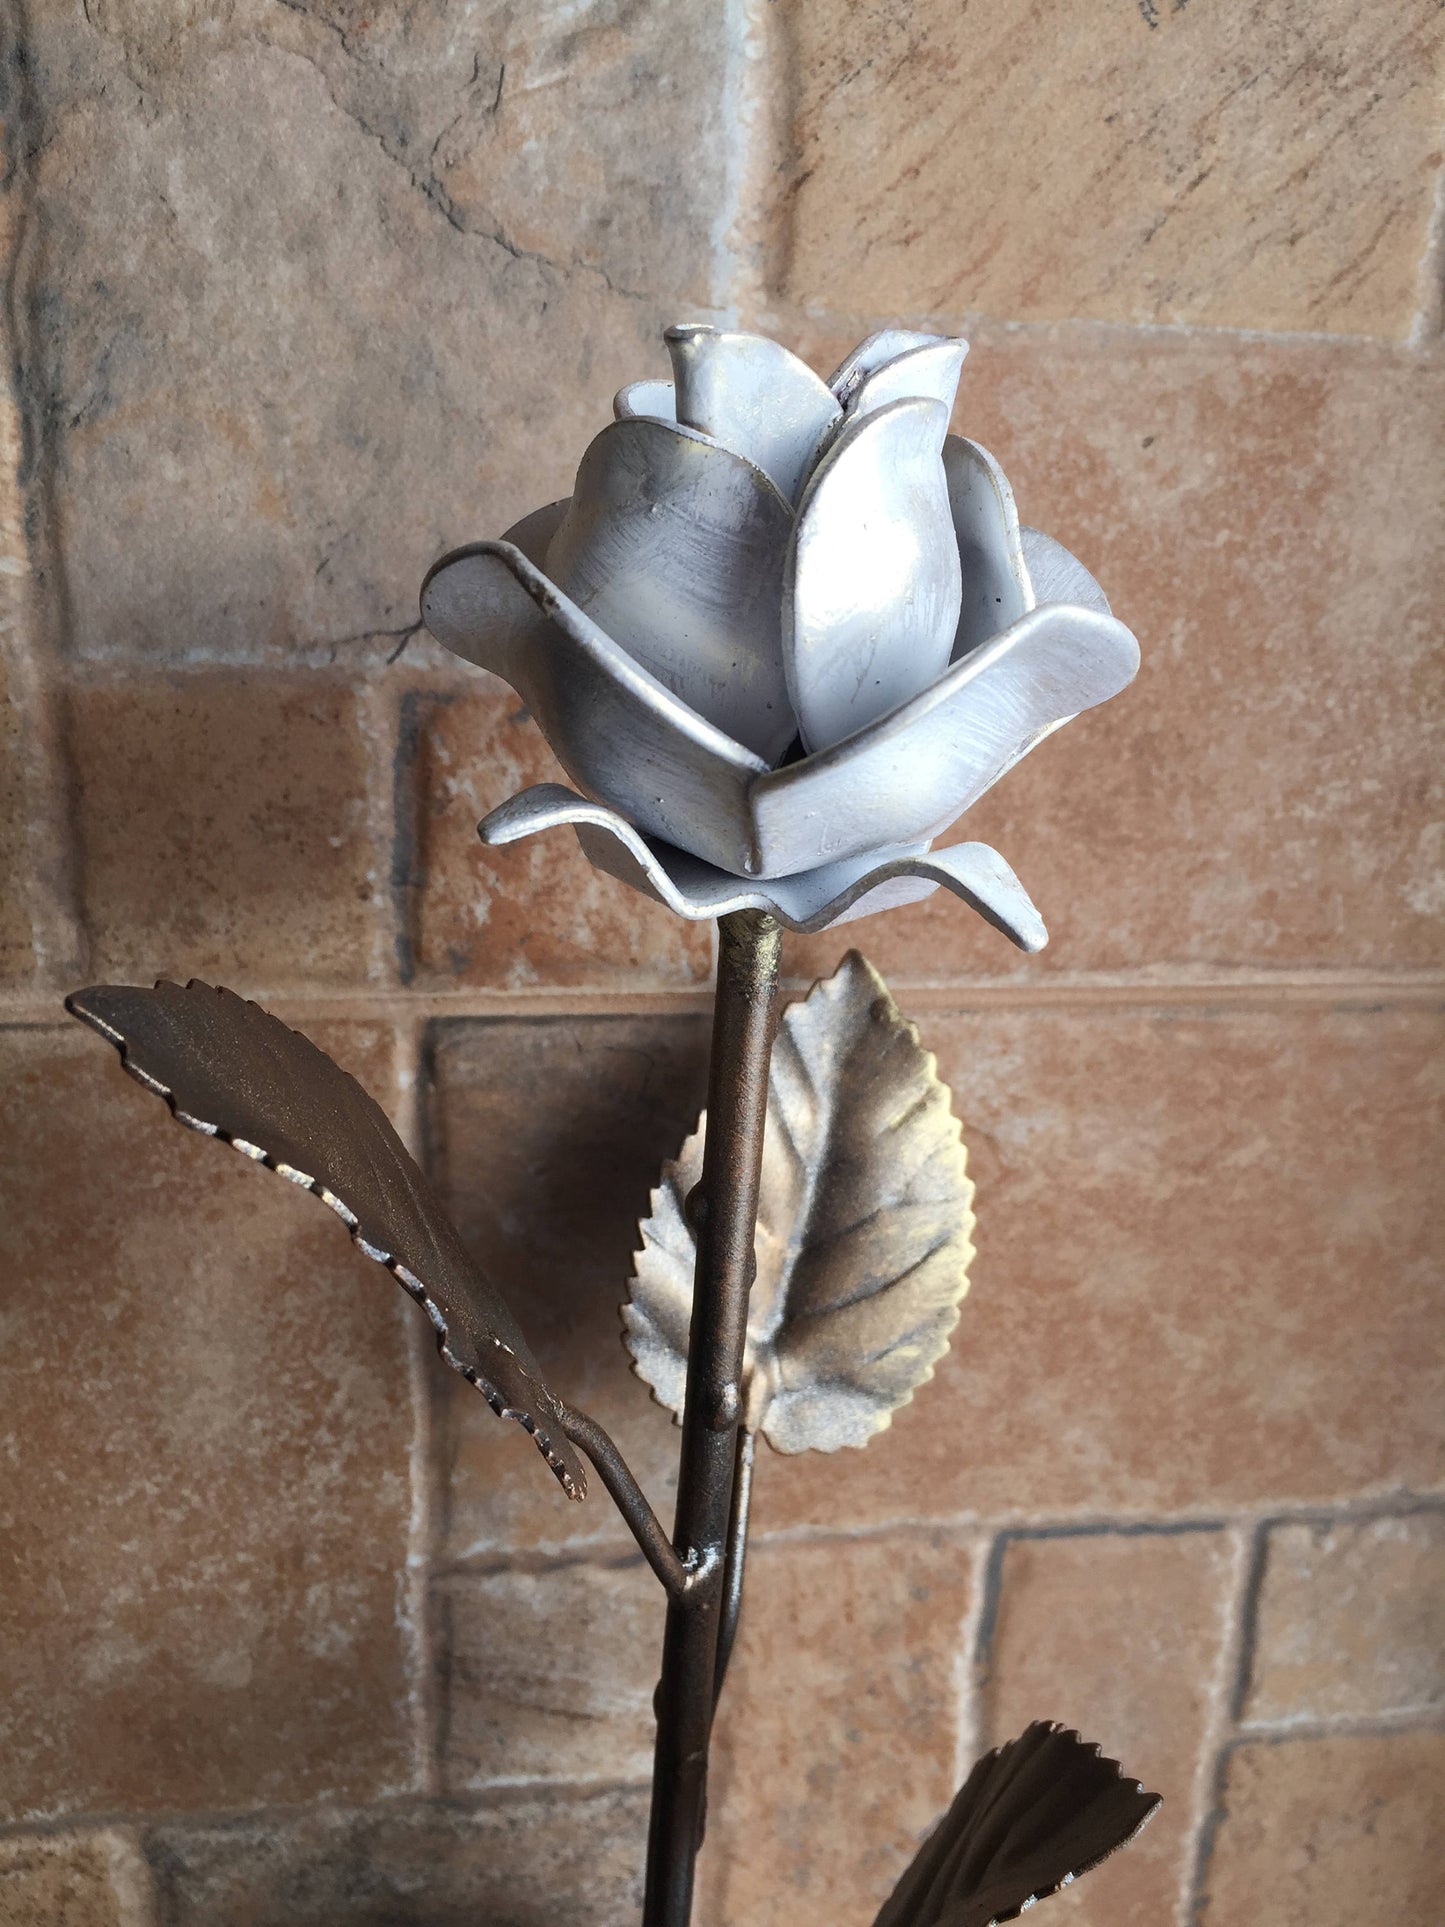 Iron anniversary, iron rose, 6th anniversary gift, hand forged rose, metal sculpture, metal rose, metal roses,forged rose, iron gift for her